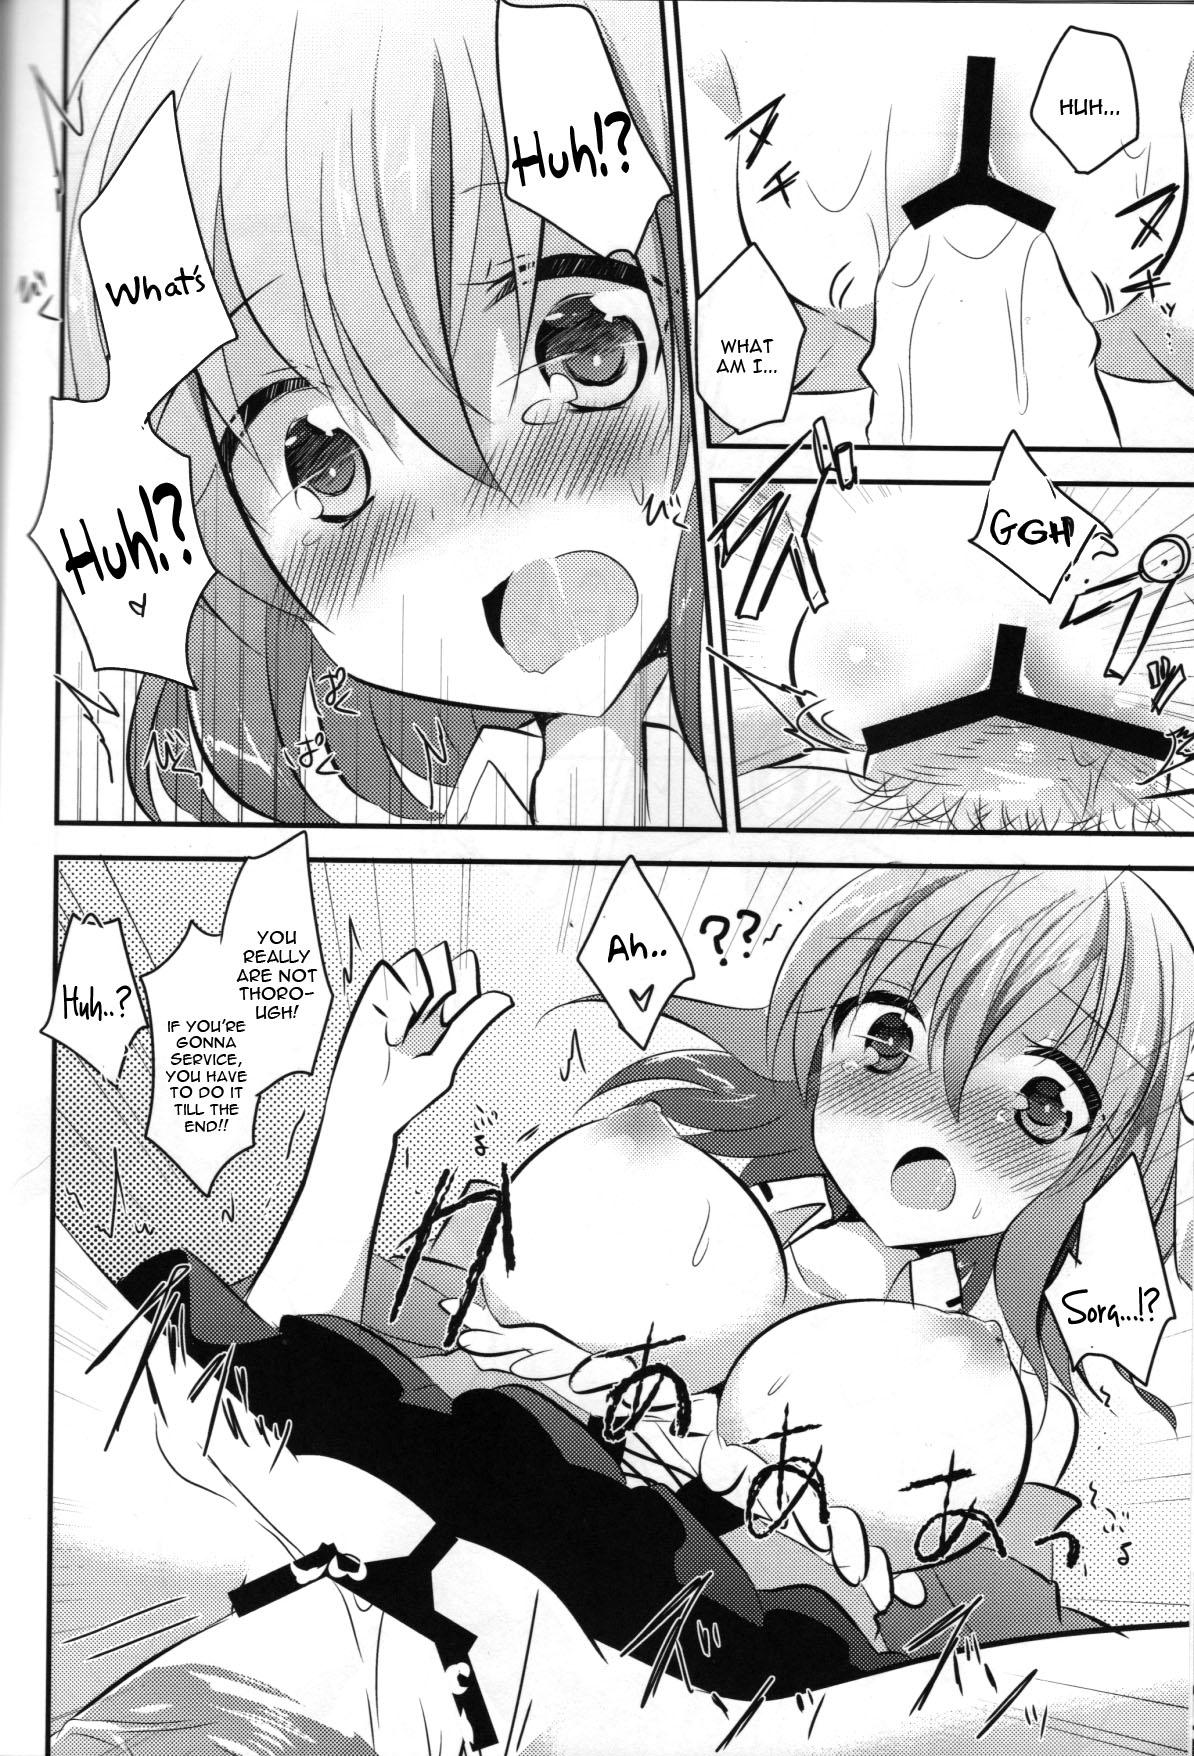 Erotic CHECKMATE! - No game no life Snatch - Page 9